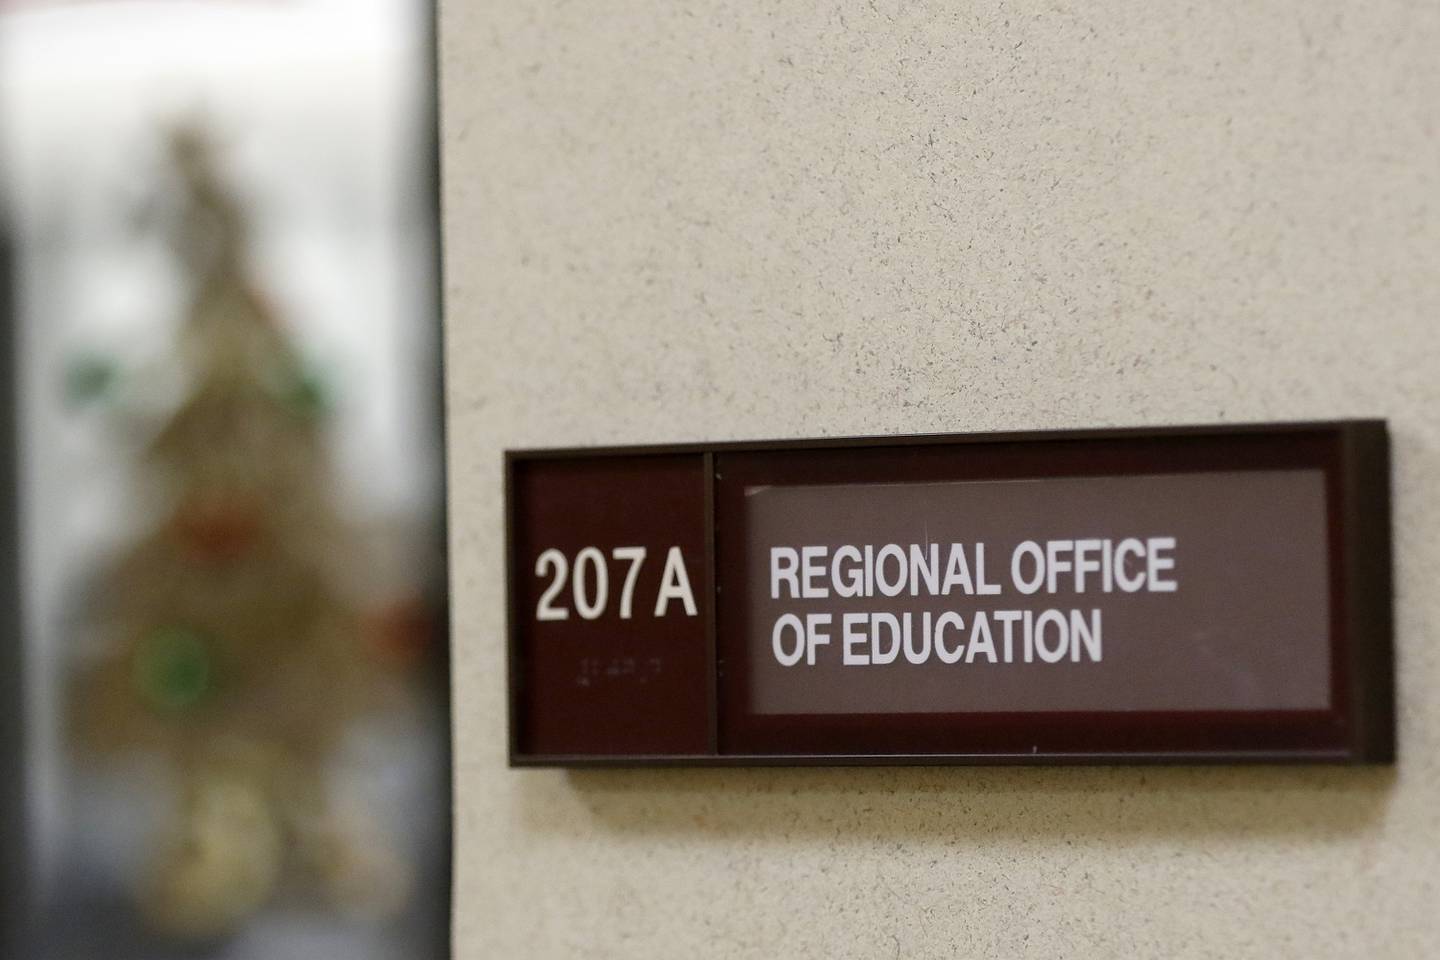 The Regional Office of Education is seen on Friday, Dec. 10, 2021, at the McHenry County Administration Building in Woodstock.